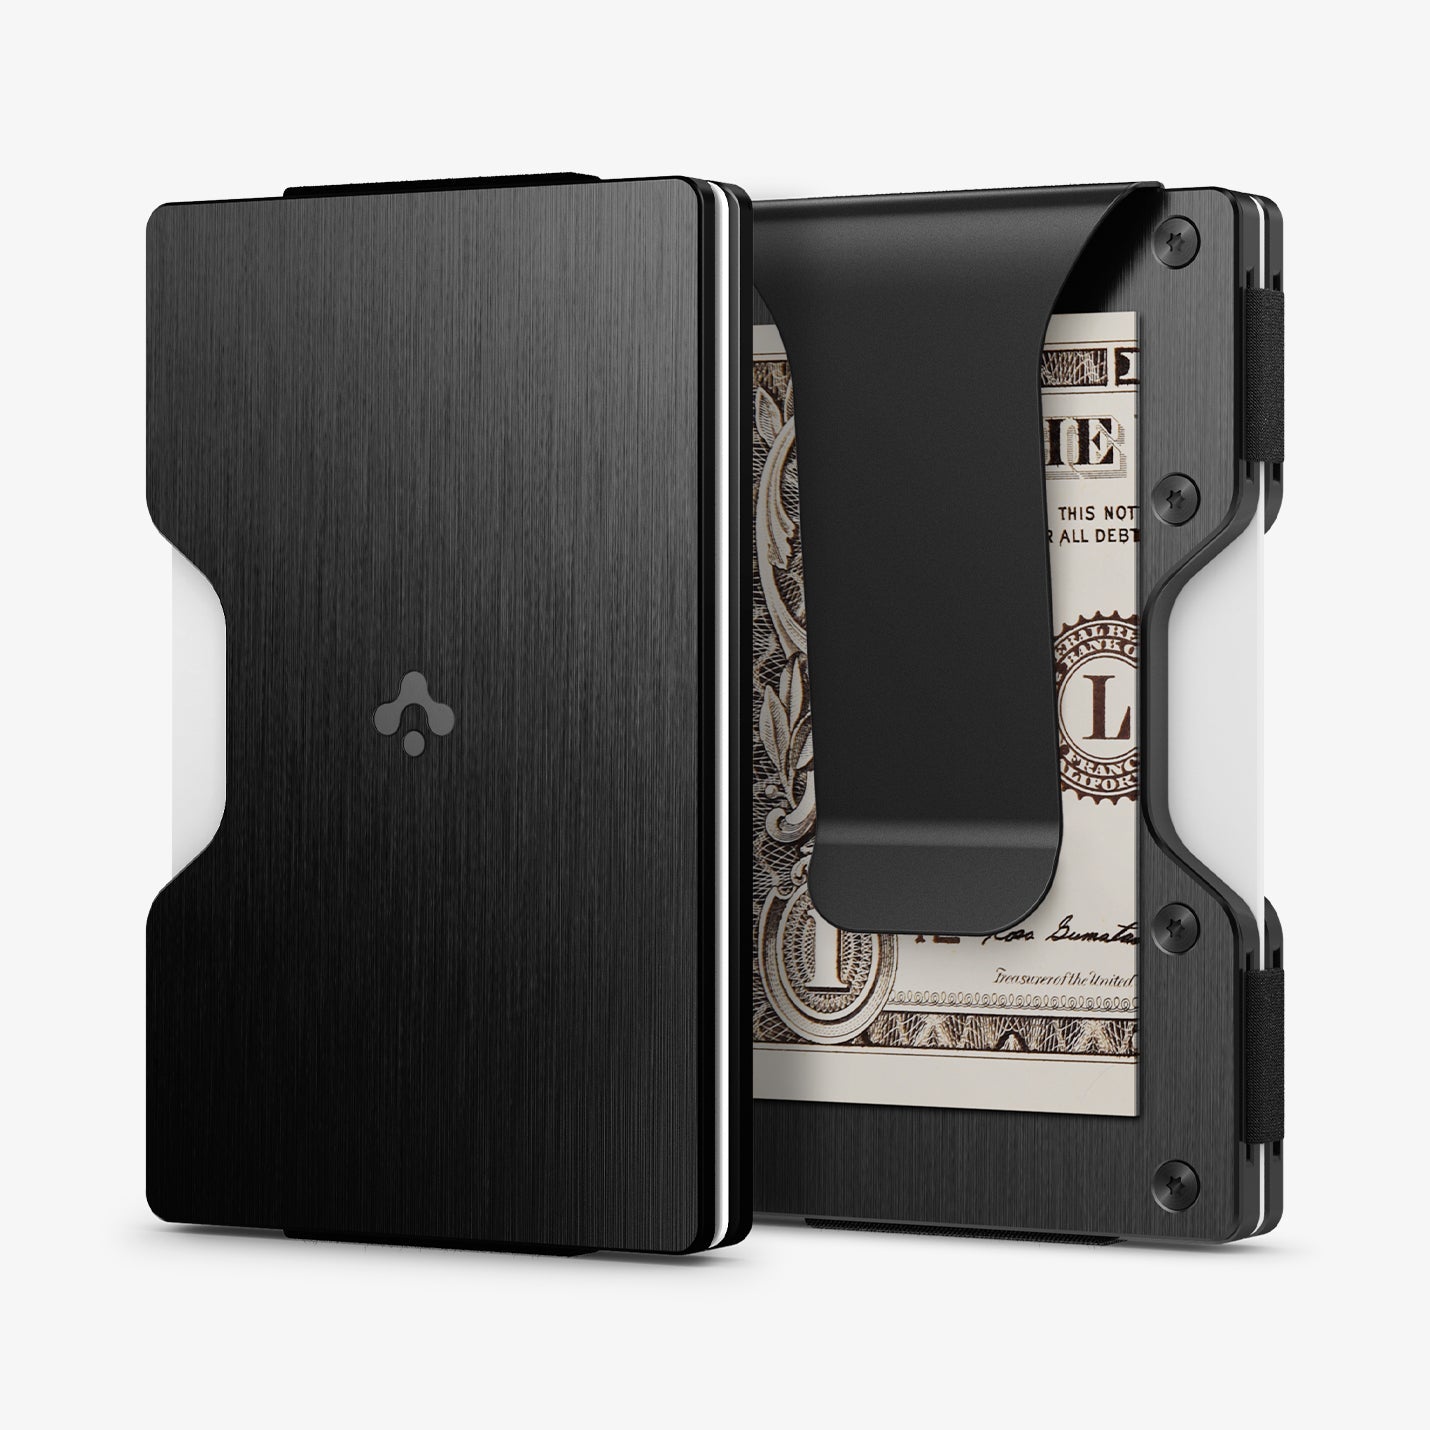 AFA05261 - Card Holder Wallet S Money Clip in black showing the front, back and sides with money in clip and card in slot